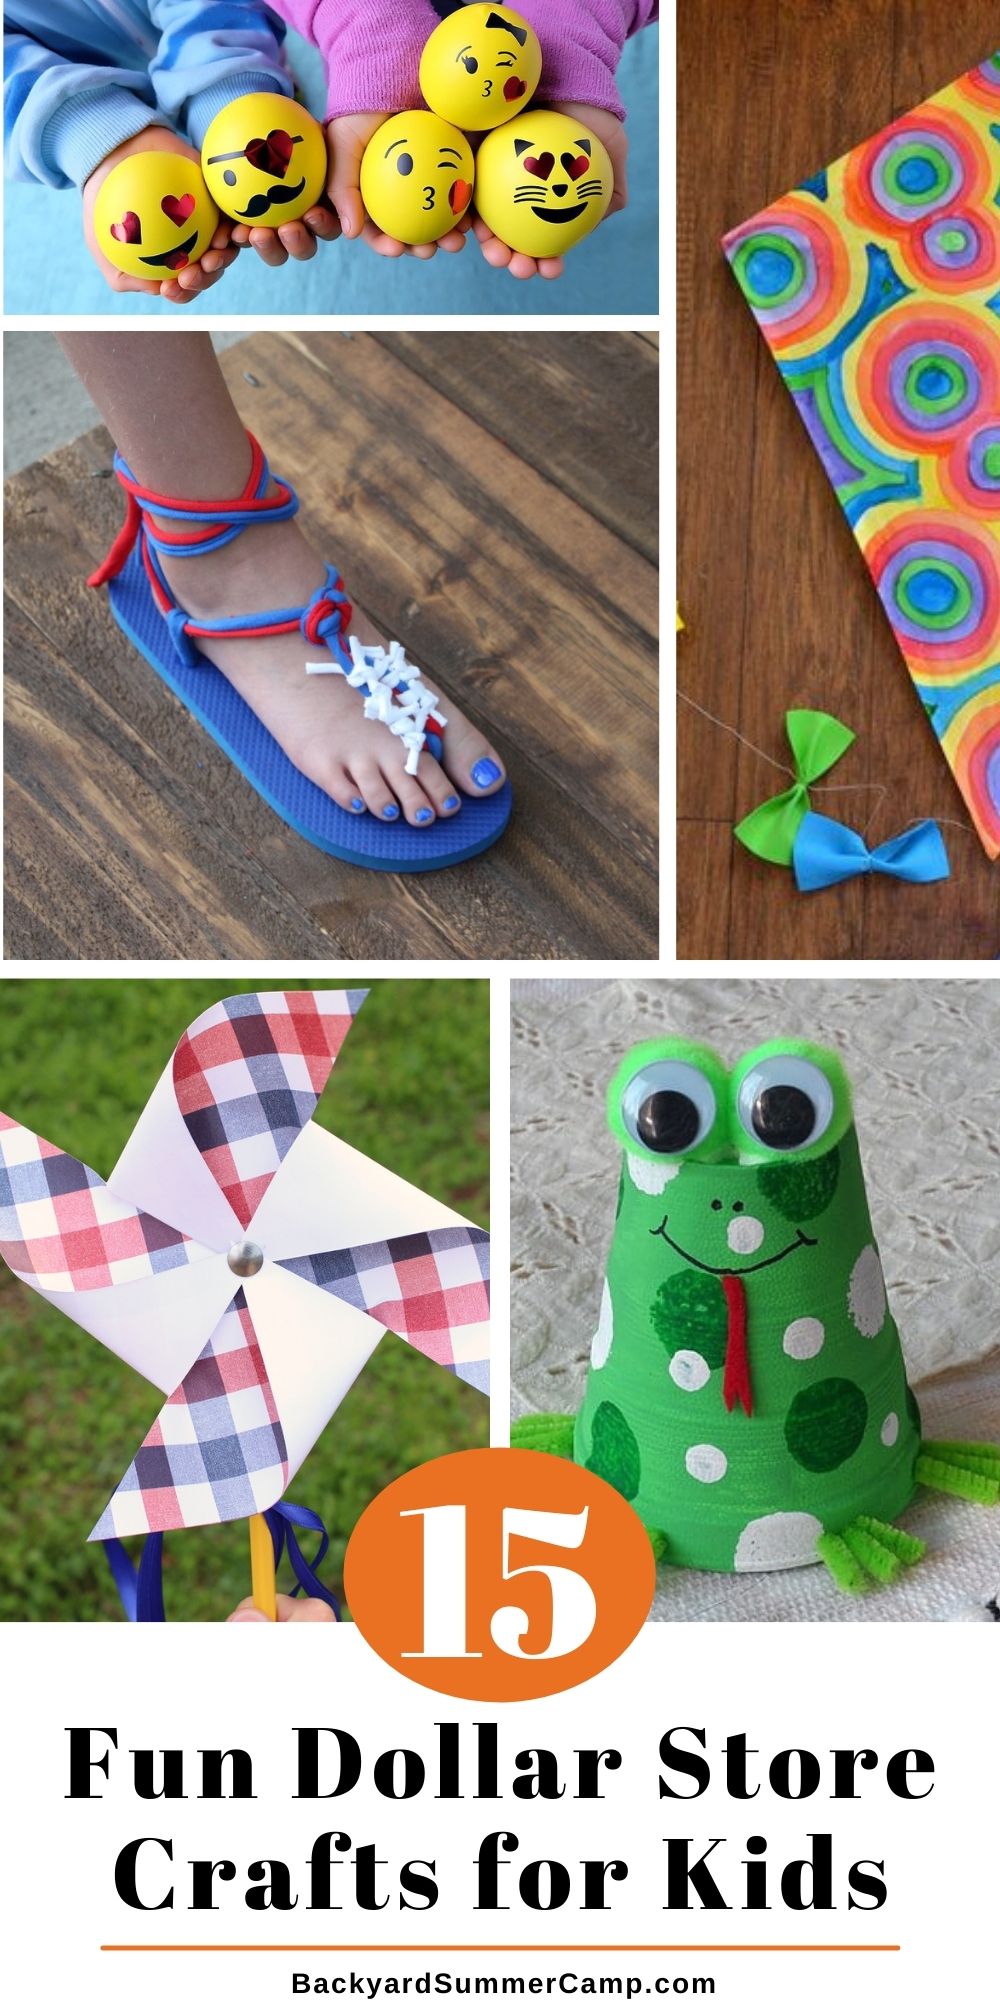 Collage of photos showing emoji stress balls, a flip flop, a paper kite, a pinwheel, and a foam cup from with text overlay "15 fun dollar store crafts for kids."